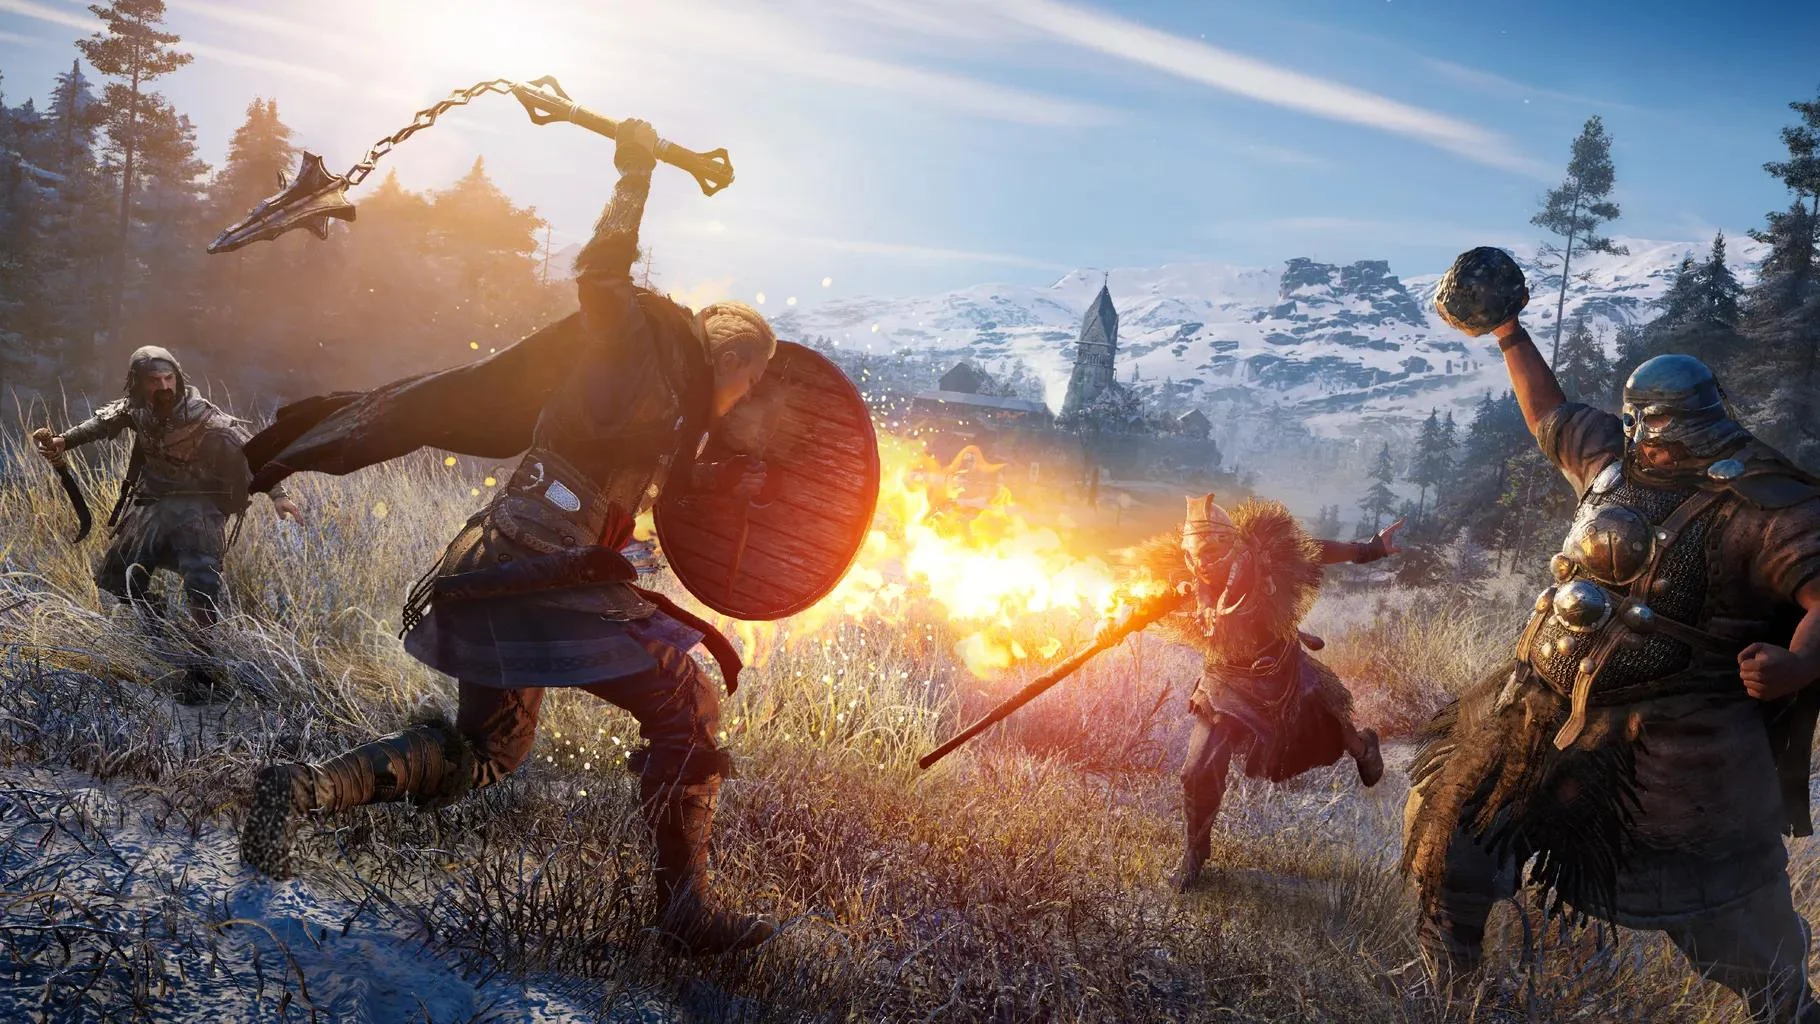 Assassin's Creed Valhalla on Game Pass: A Viking Adventure Unlike Any Other